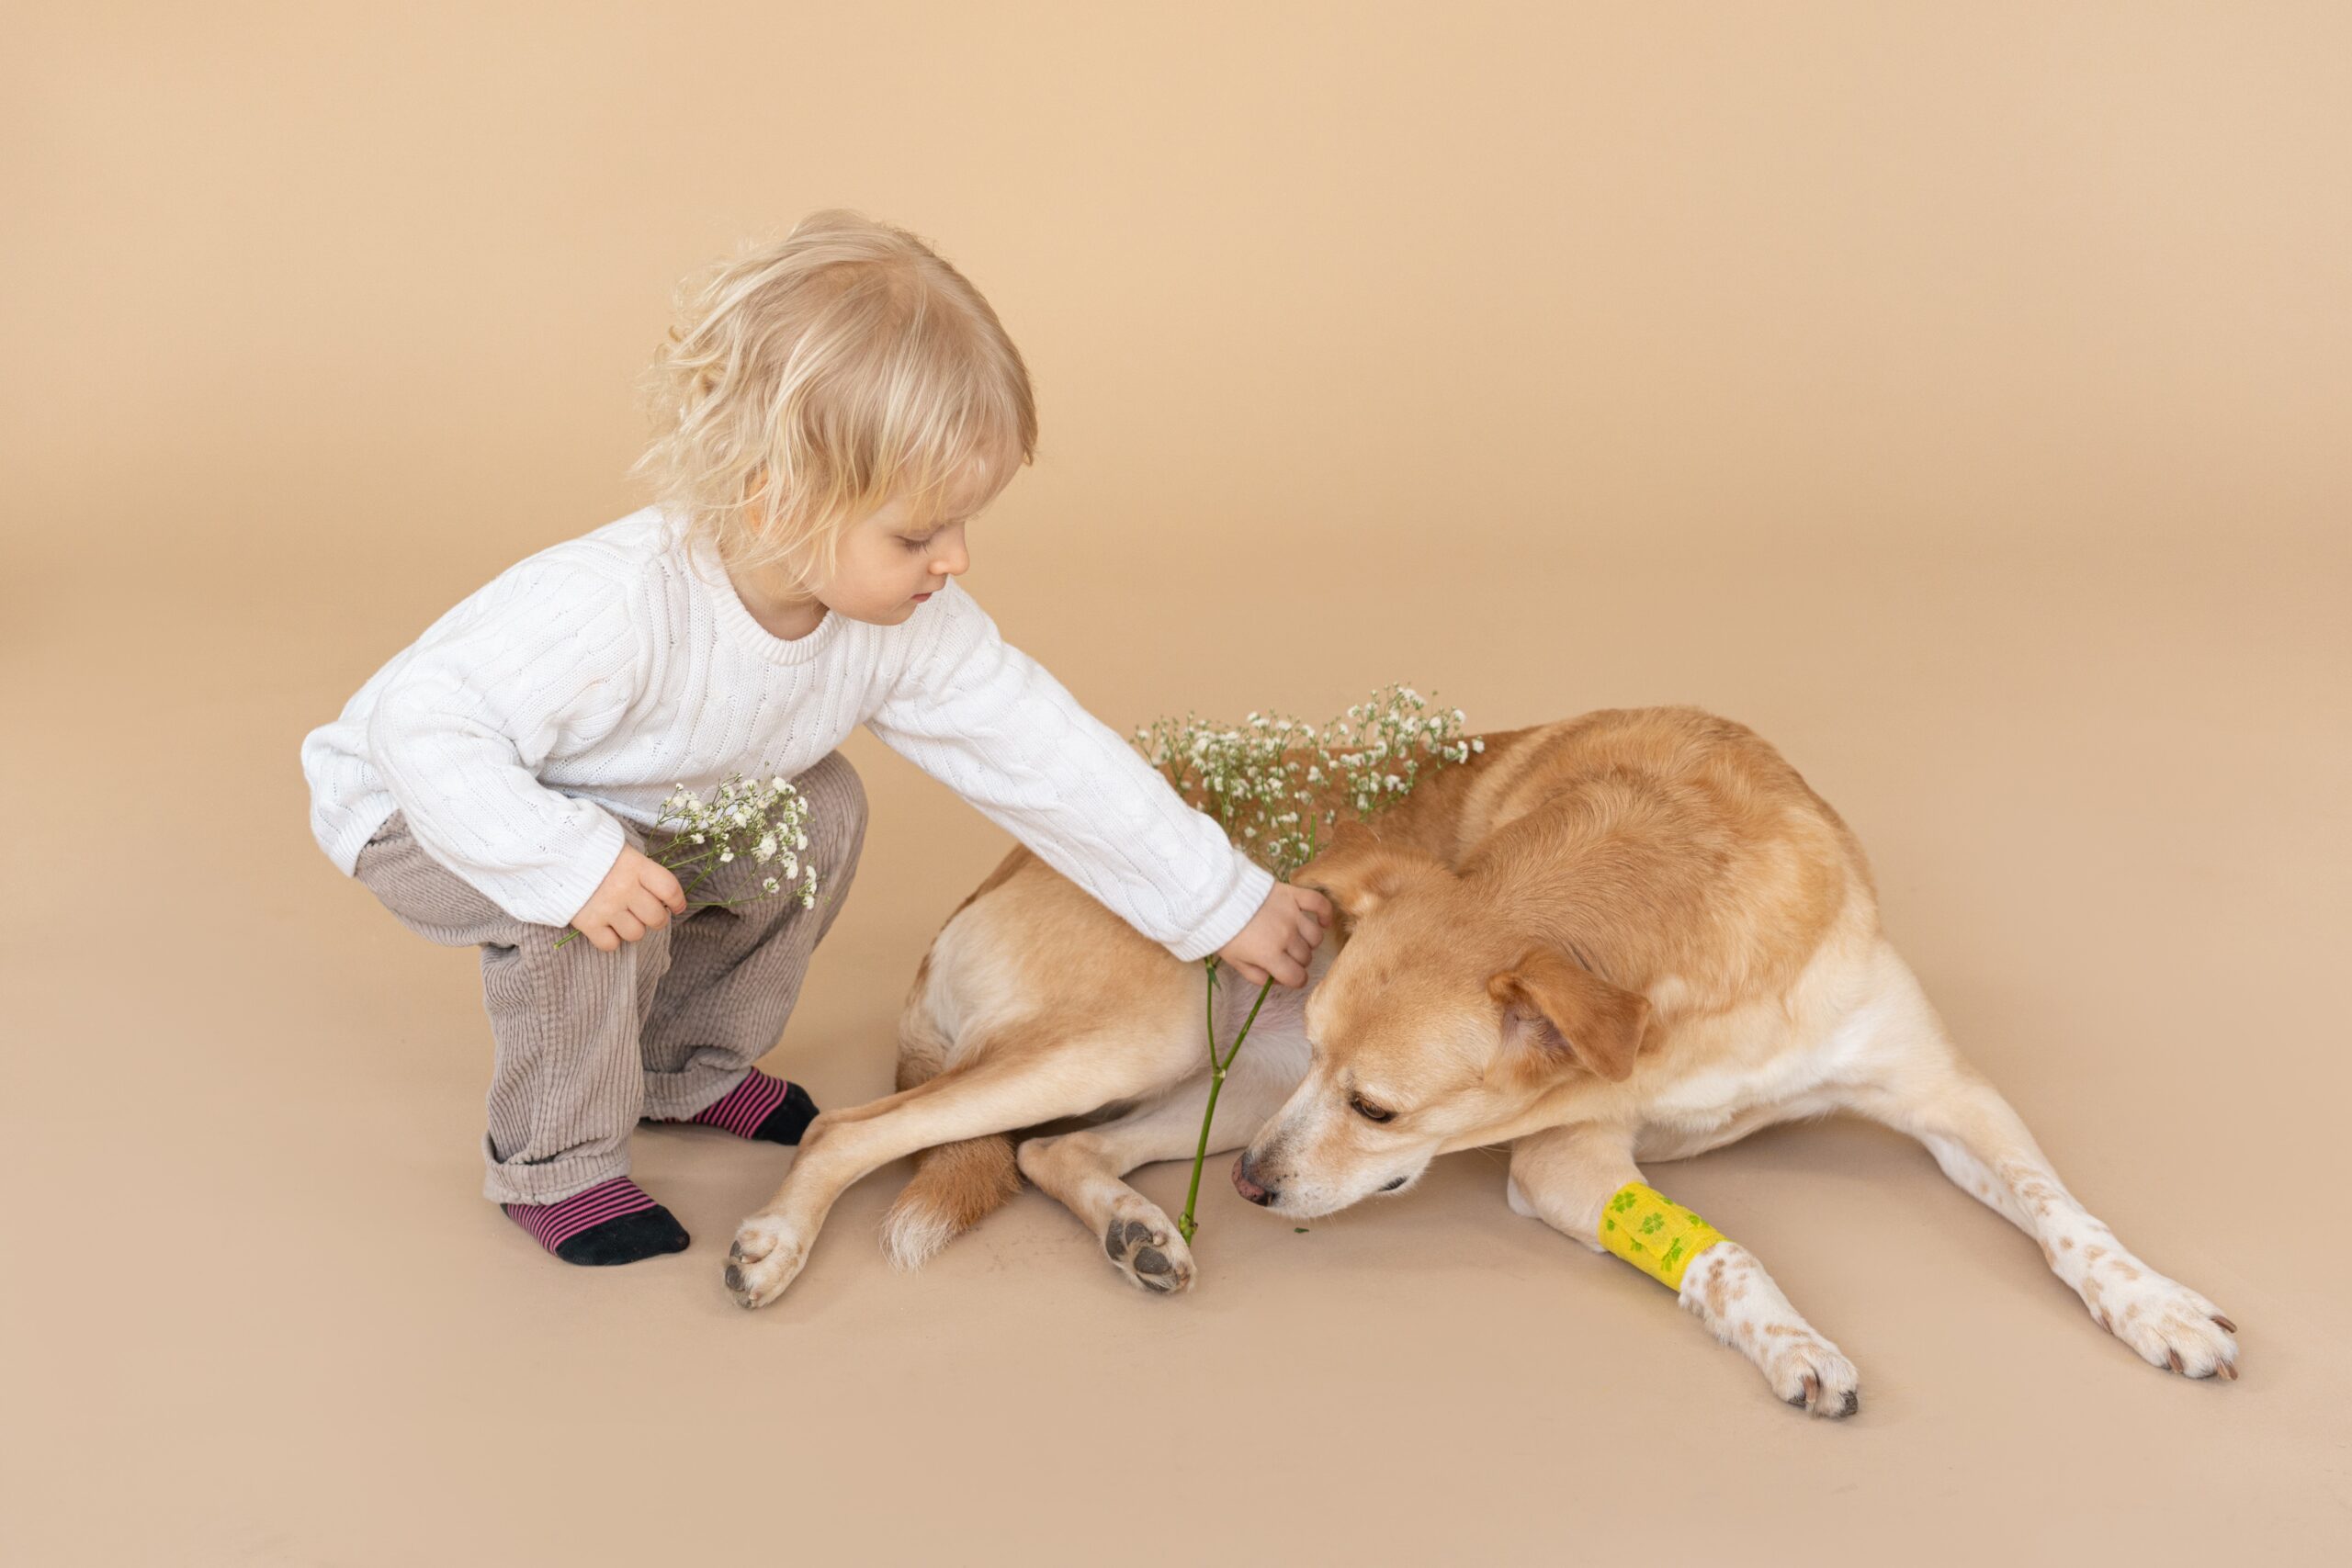 Top 4 Dog Breeds for Families With Children